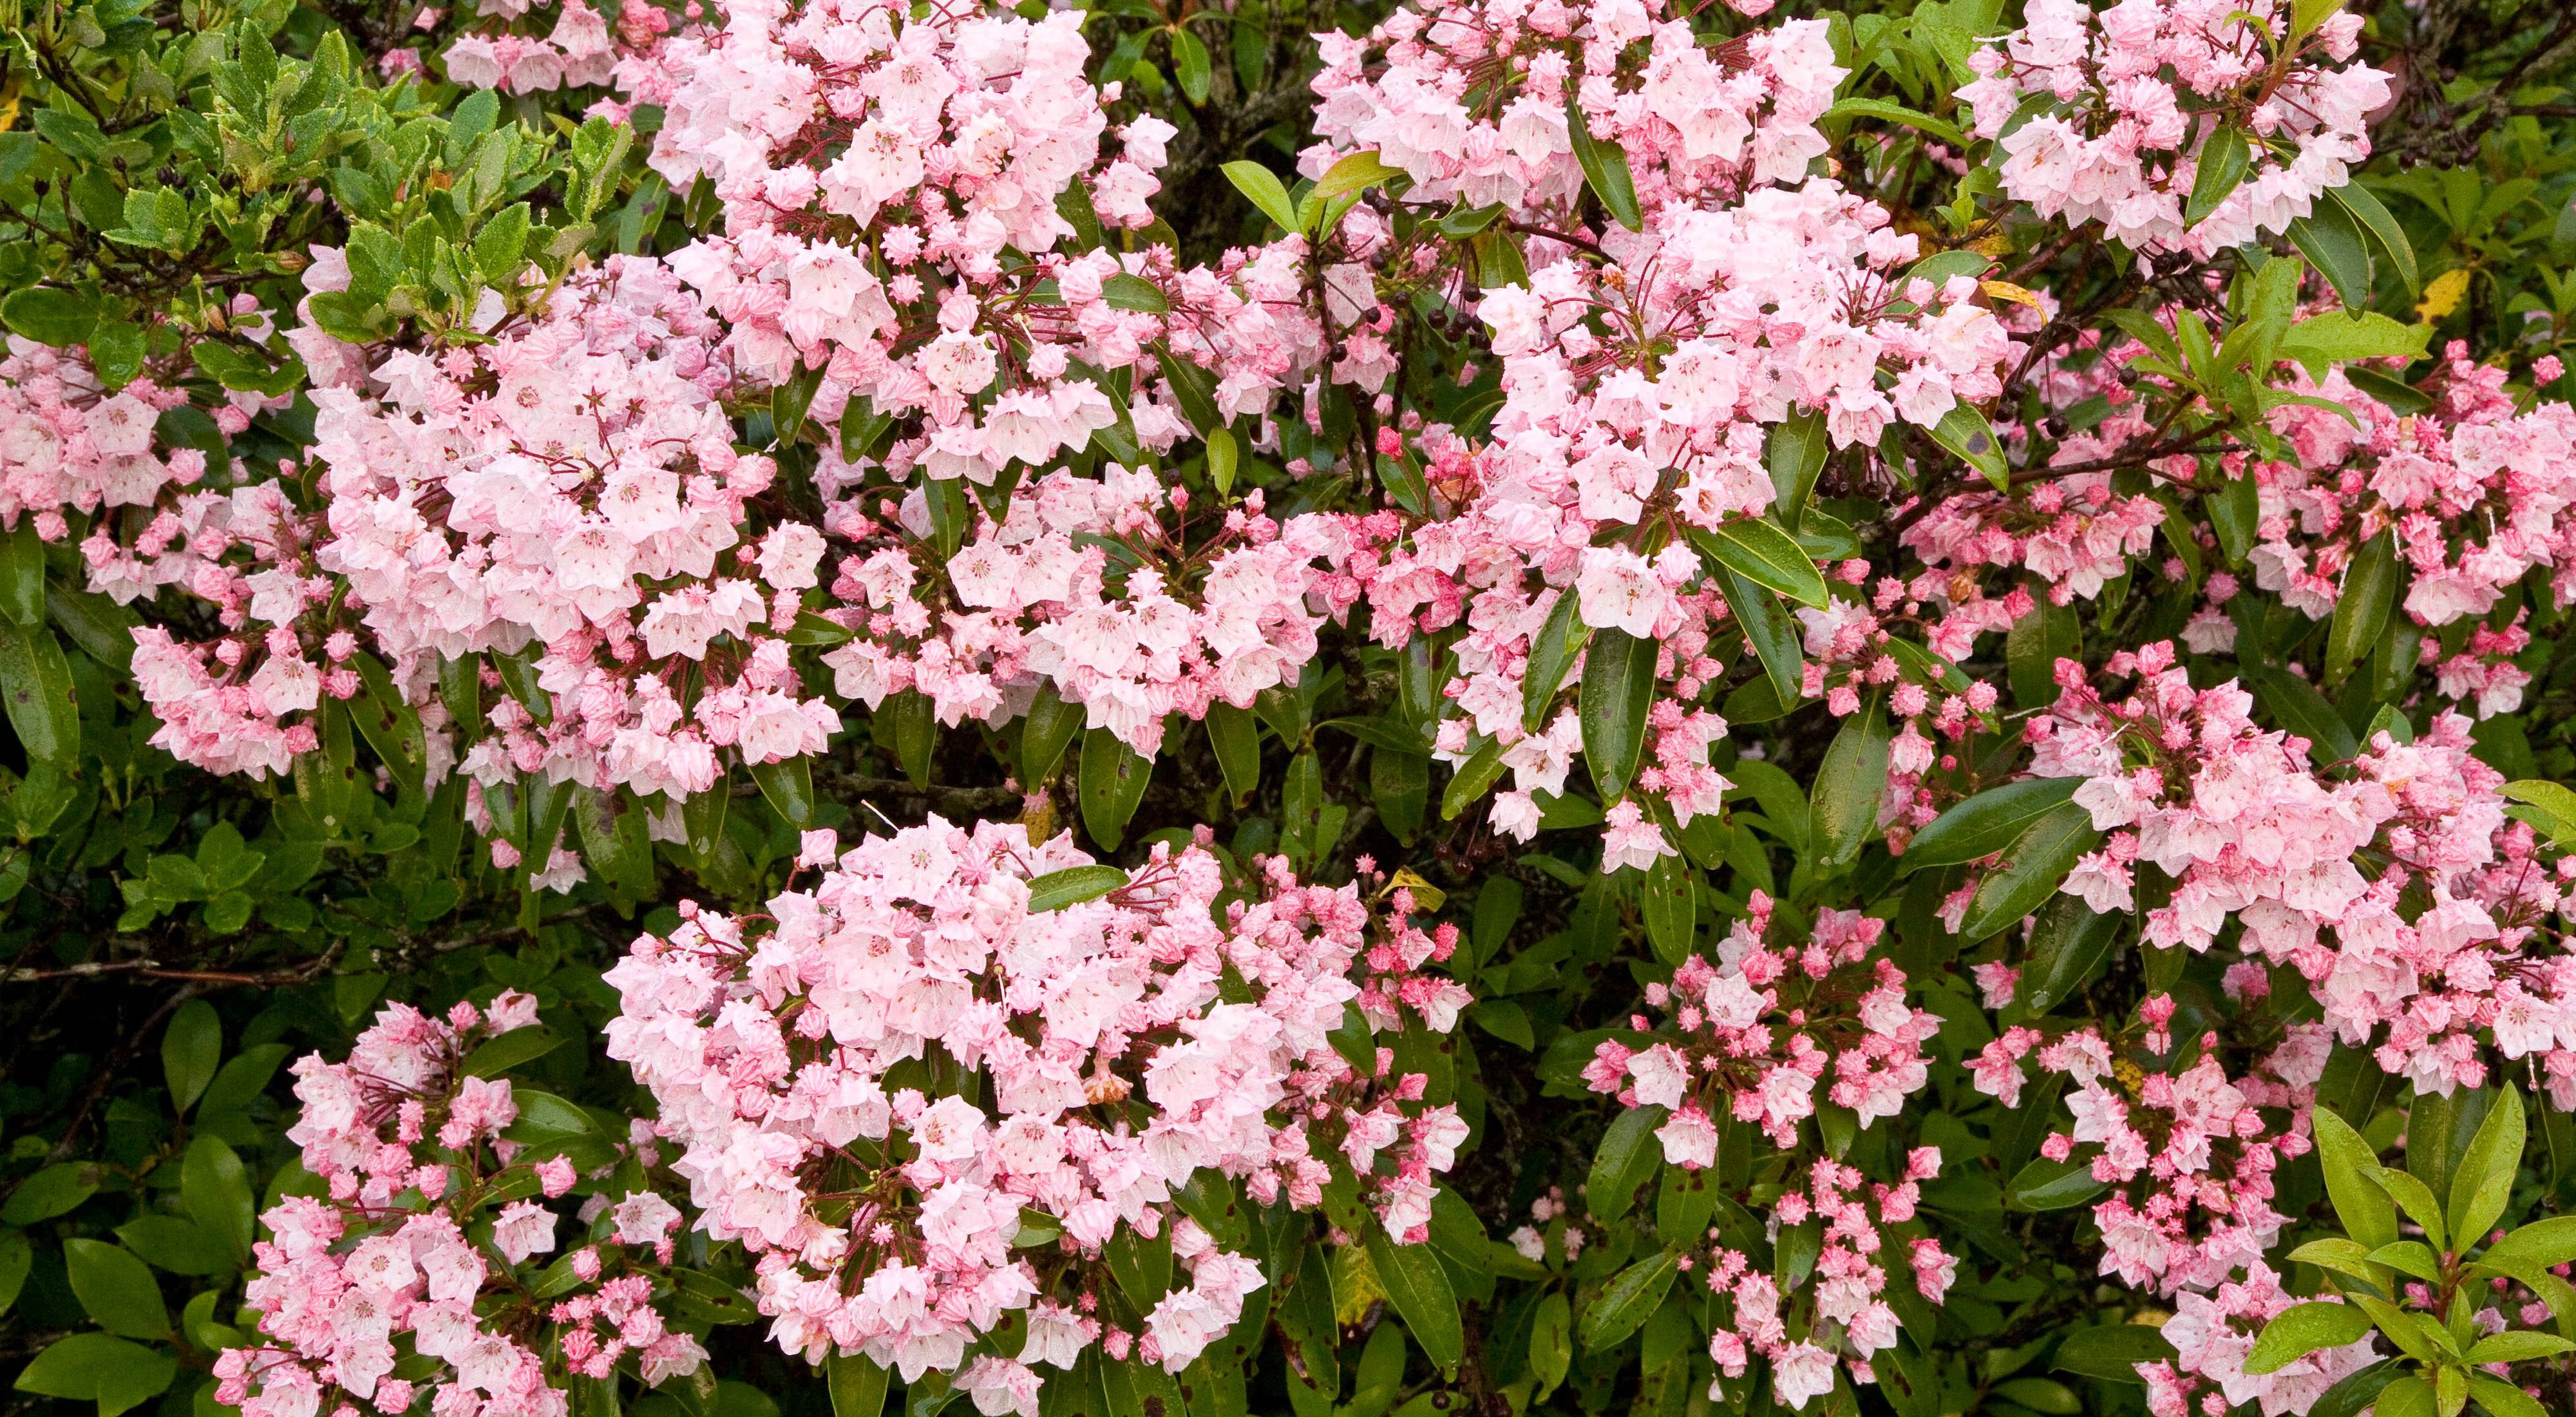 Thick clusters of bright pink blossoms of mountain laurel.